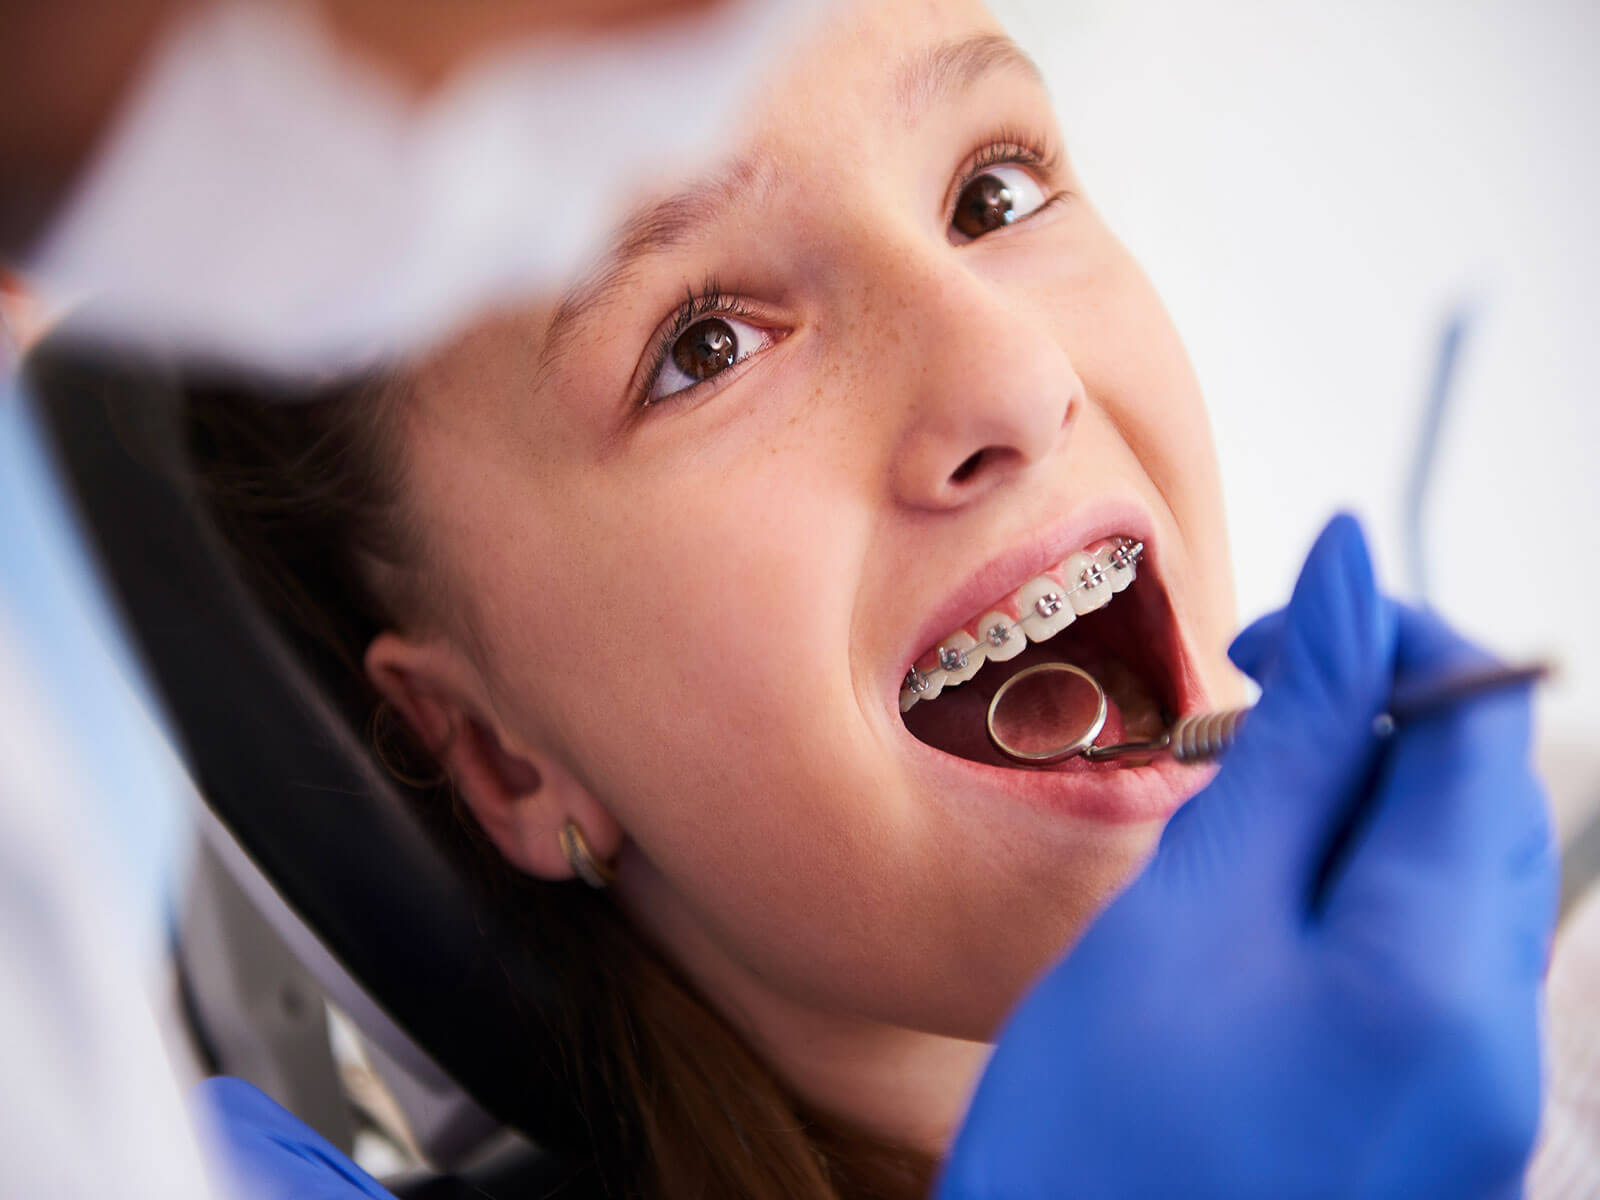 Top Reasons Your Child Might Need Braces